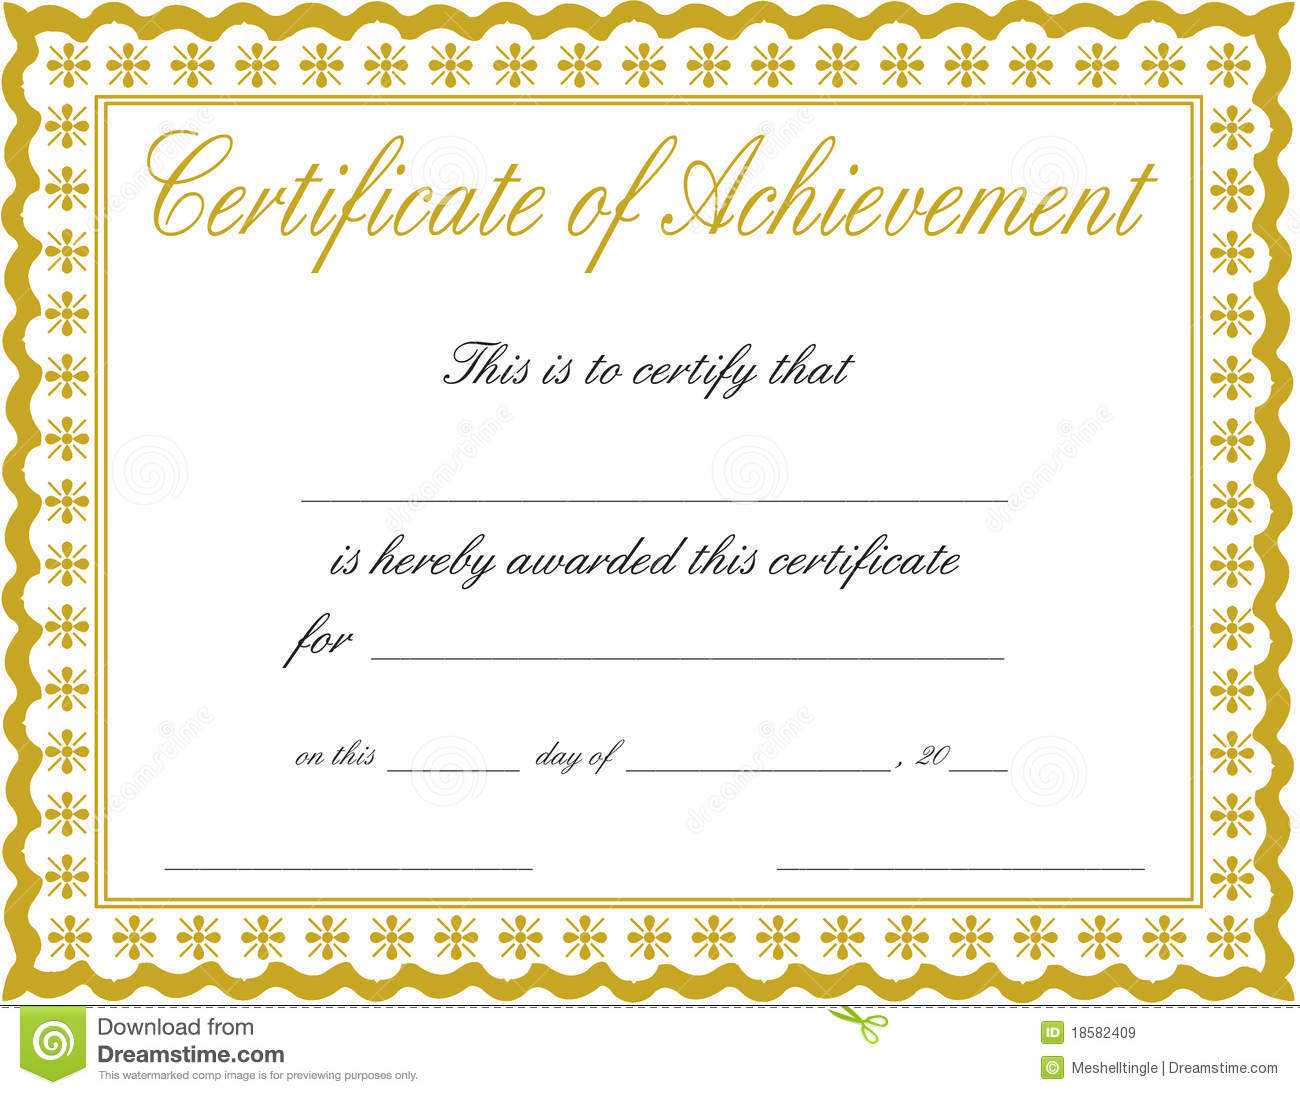 Certificate Of Accomplishment Template With Regard To Blank Certificate Of Achievement Template